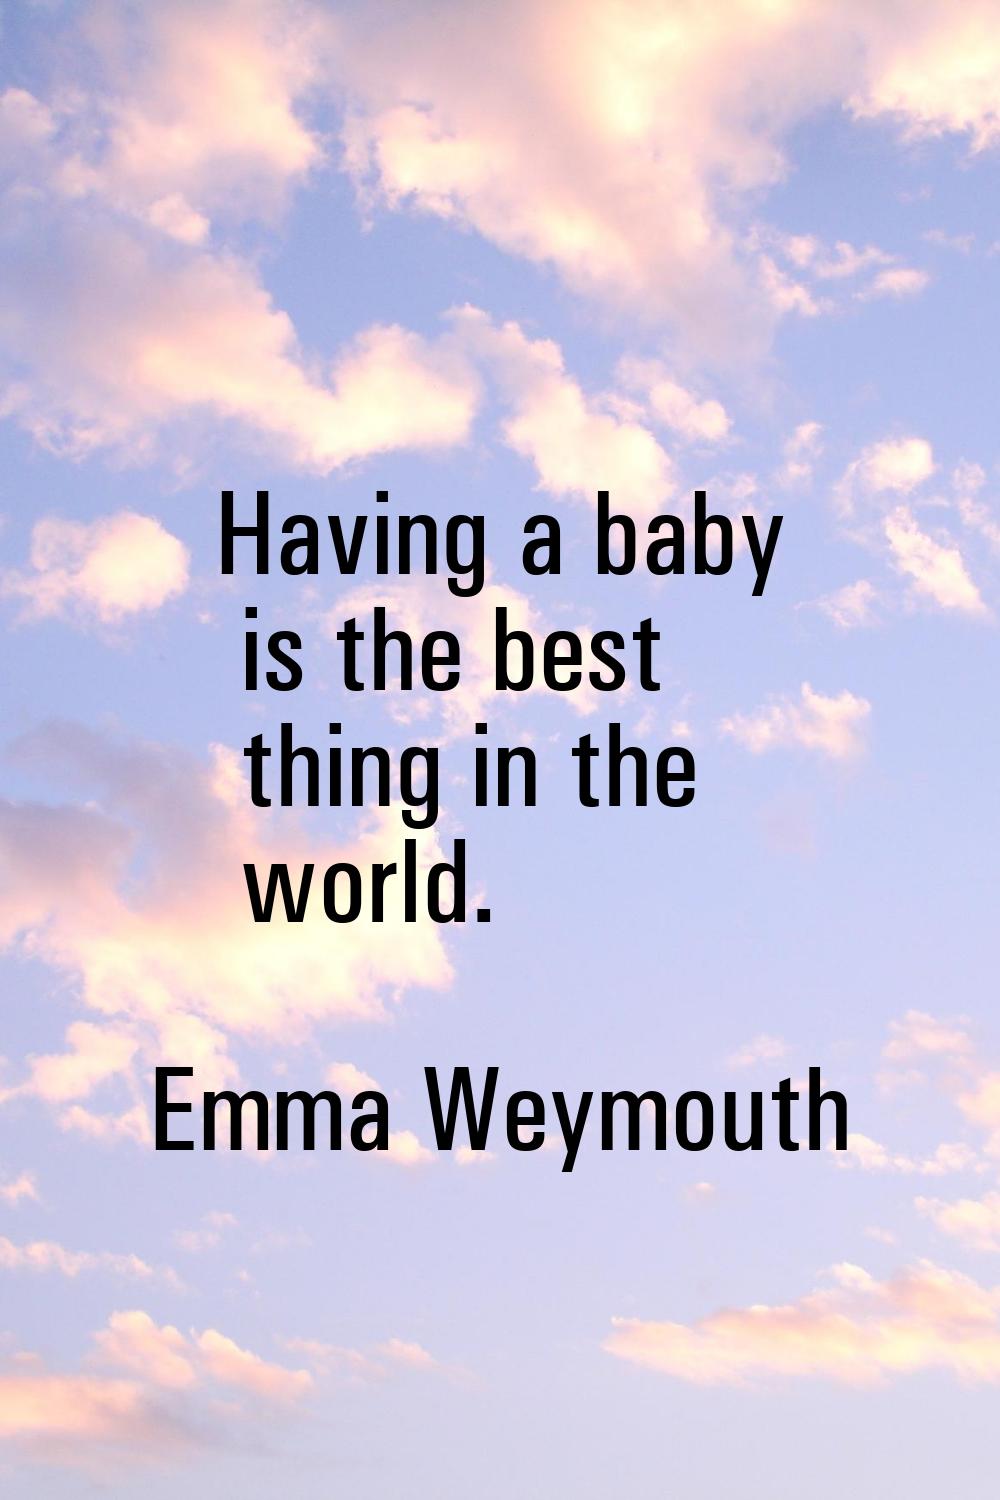 Having a baby is the best thing in the world.